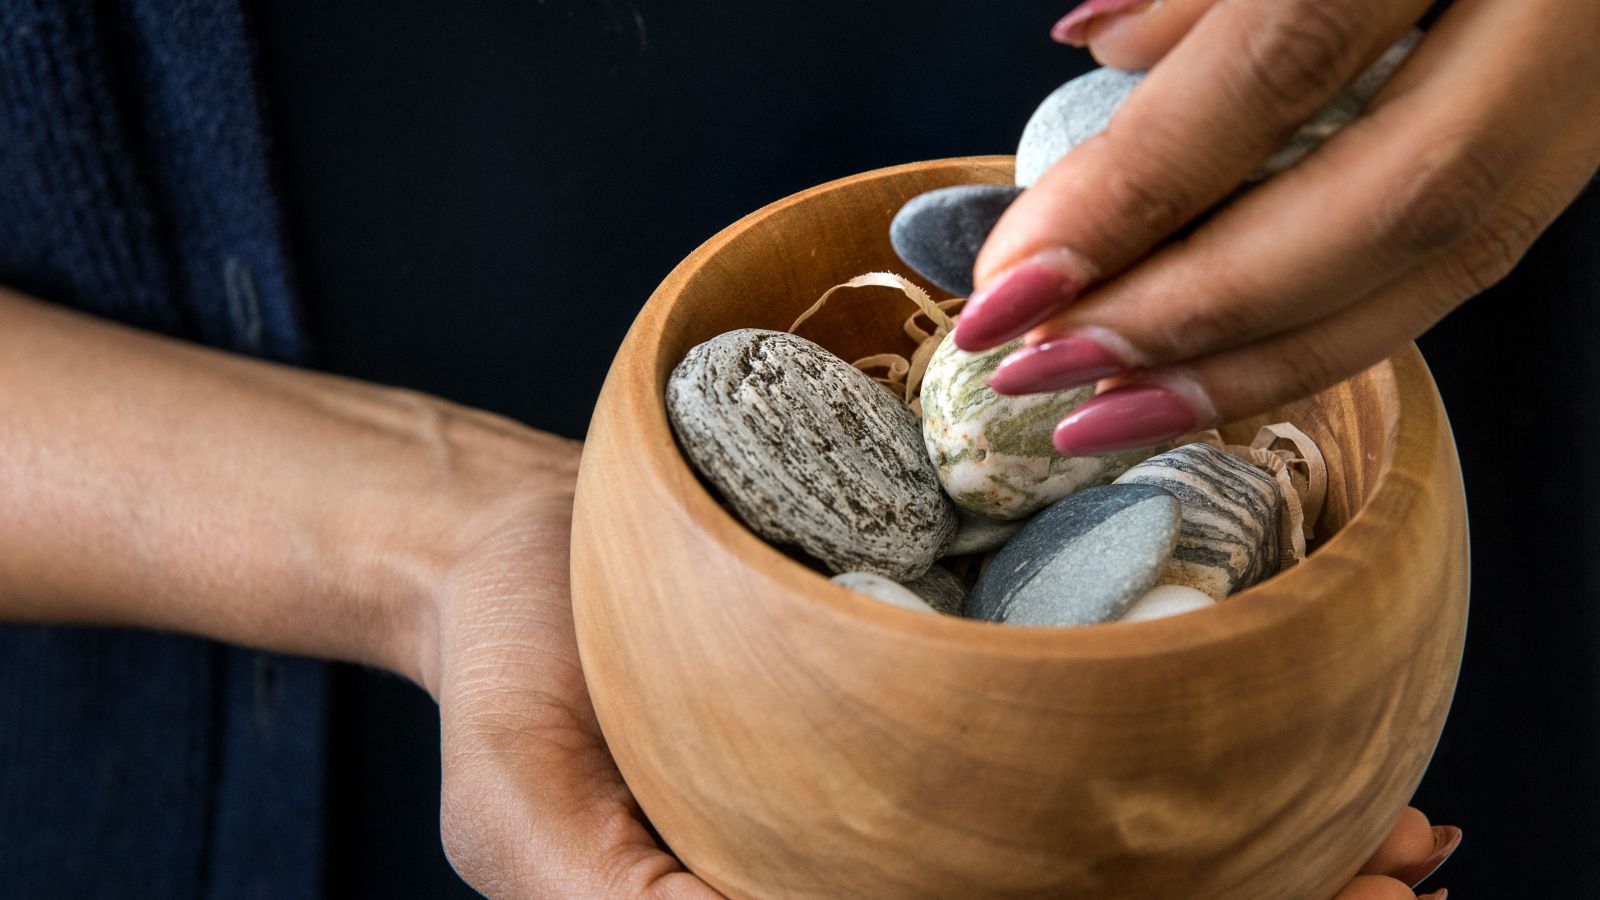 A woman holds a wooden bowl containing stones while she extends one of the stones as a gift.